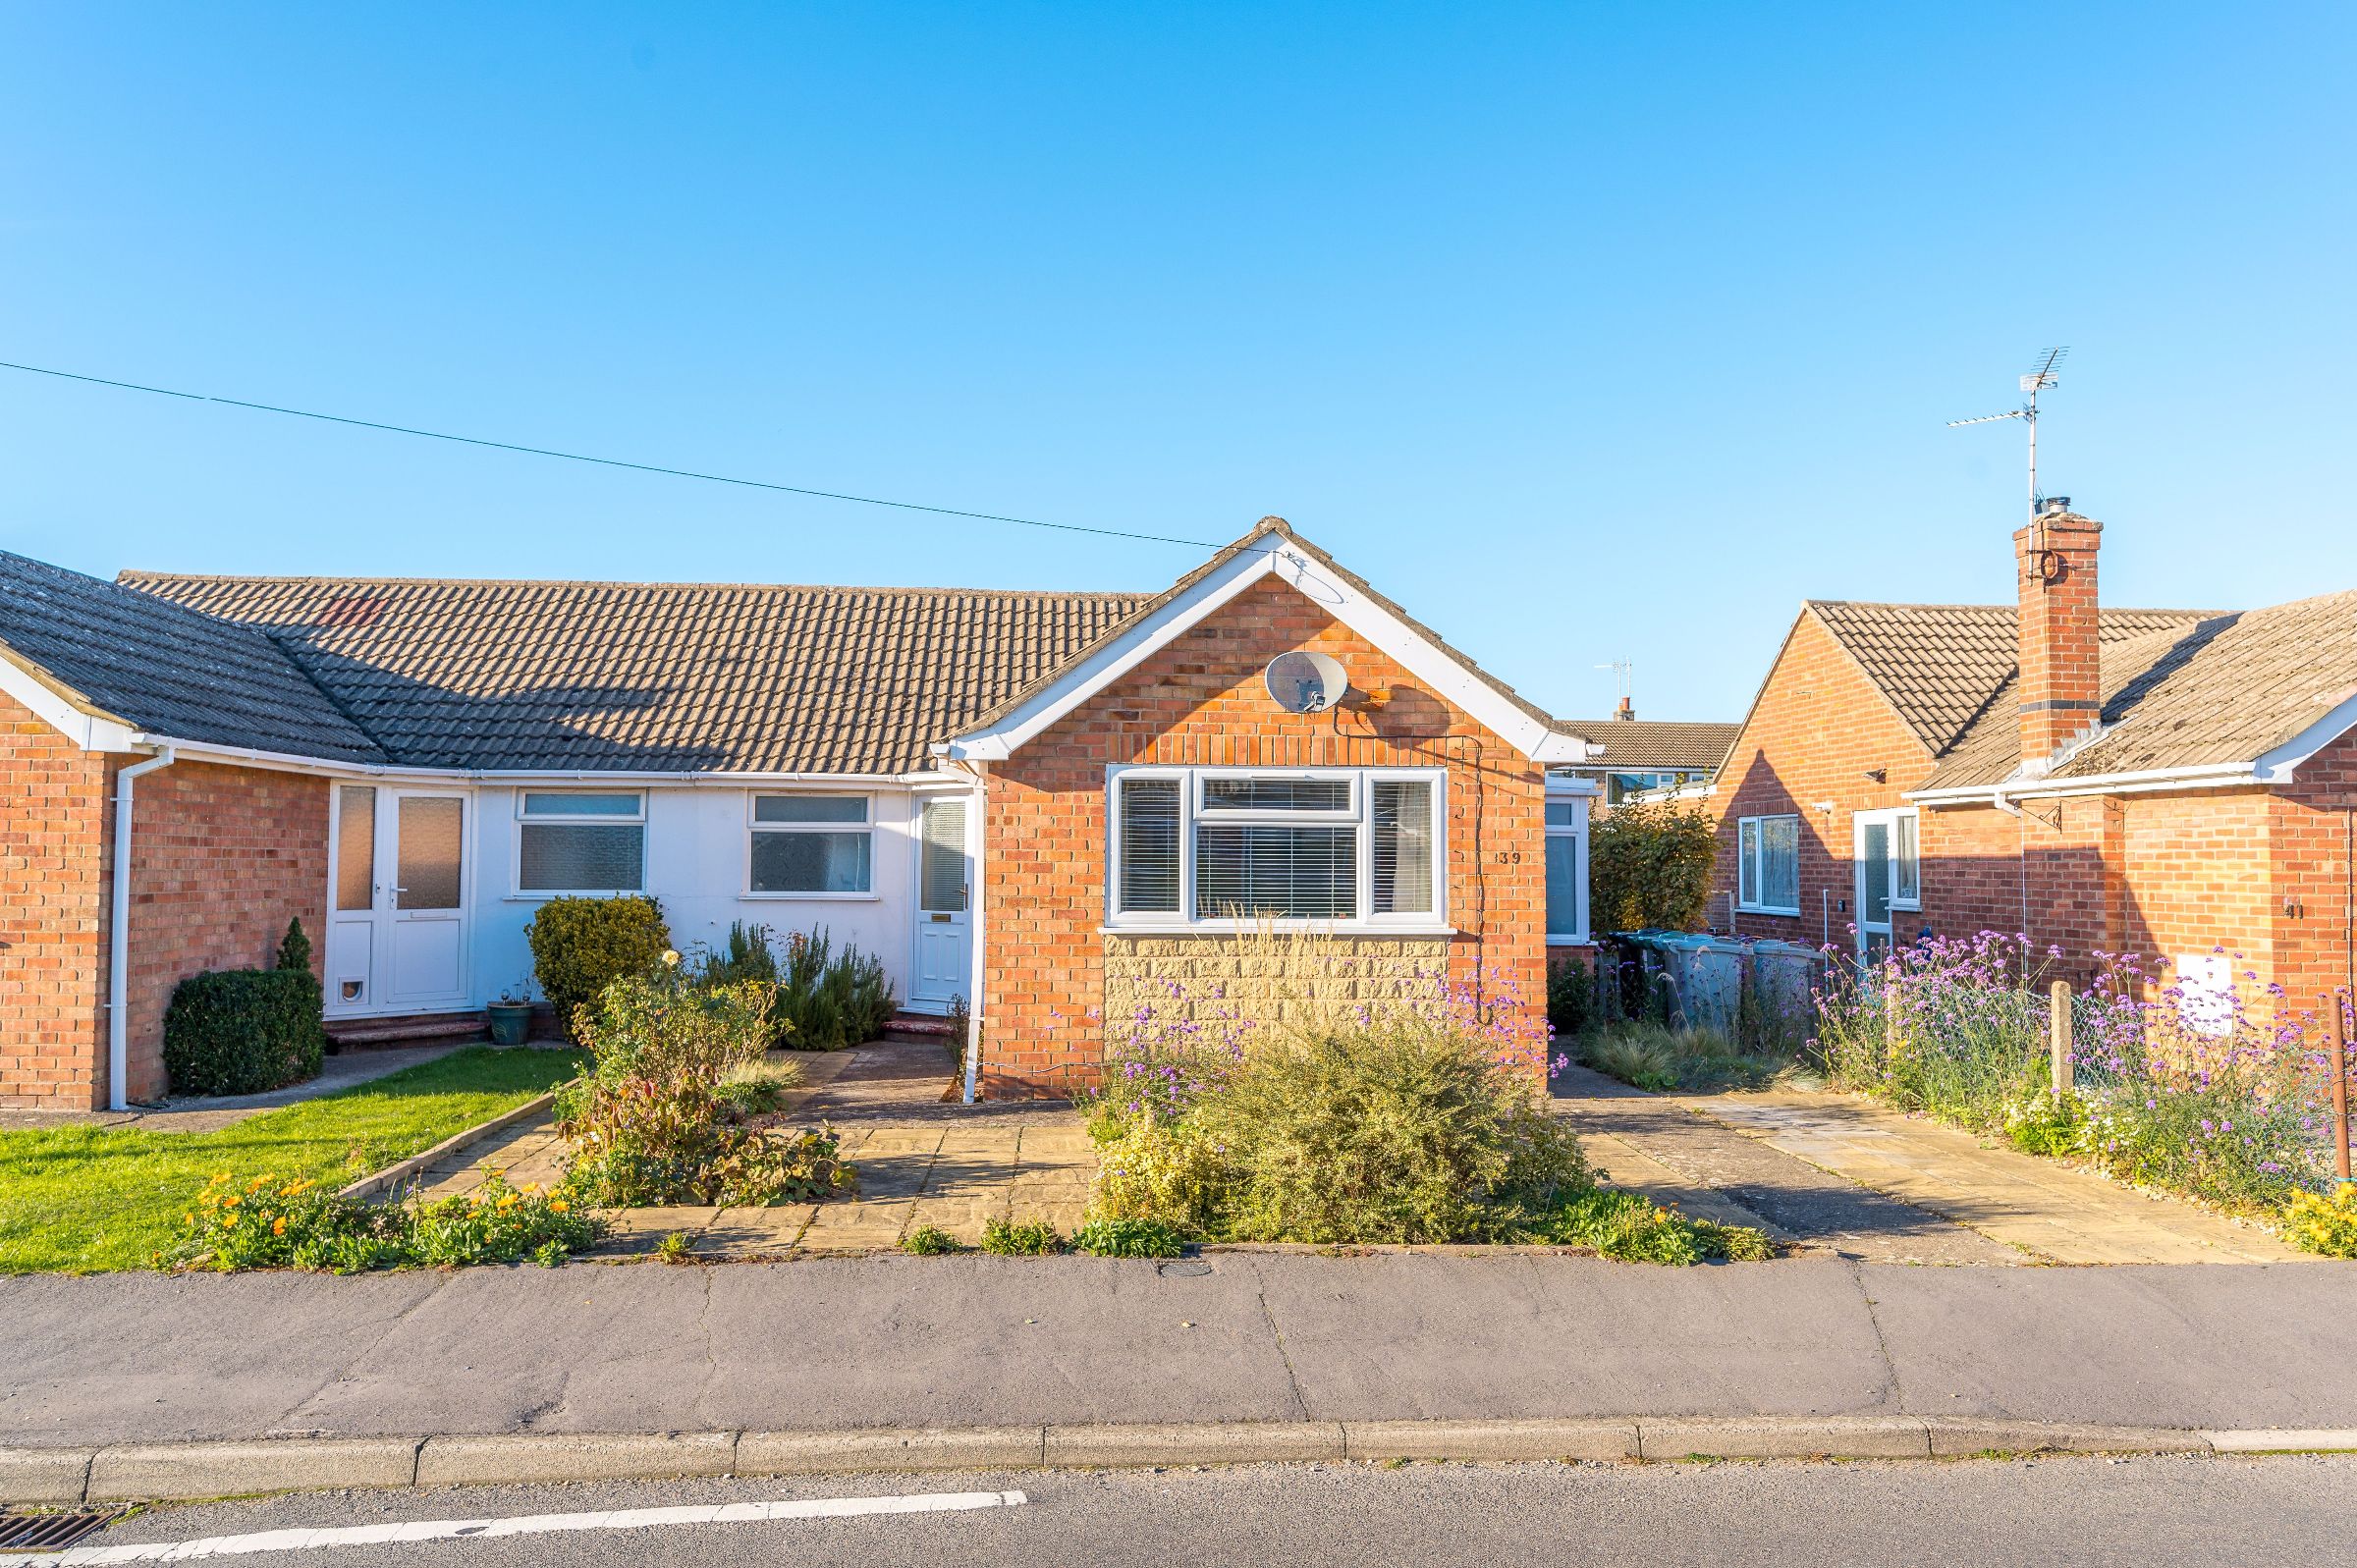 2 bed bungalow for sale in The Grove, Peterborough - Property Image 1